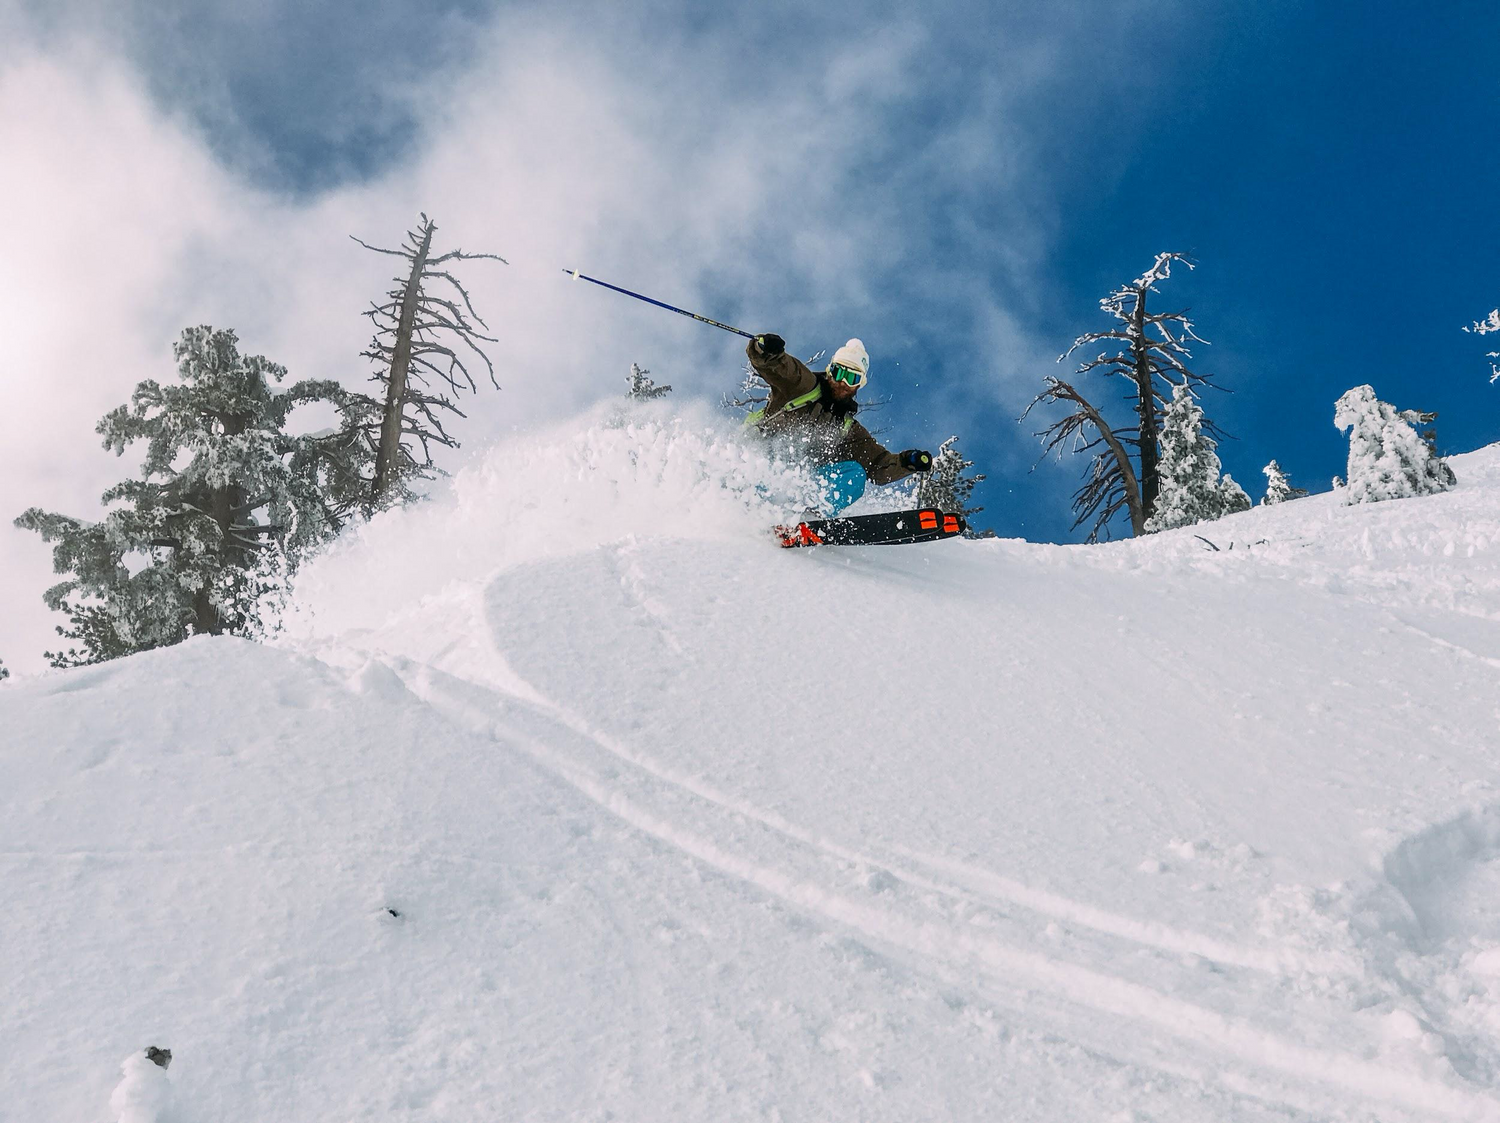 Lake Tahoe’s ample snowfall and abundant sunshine create blissful conditions for backcountry skiing.